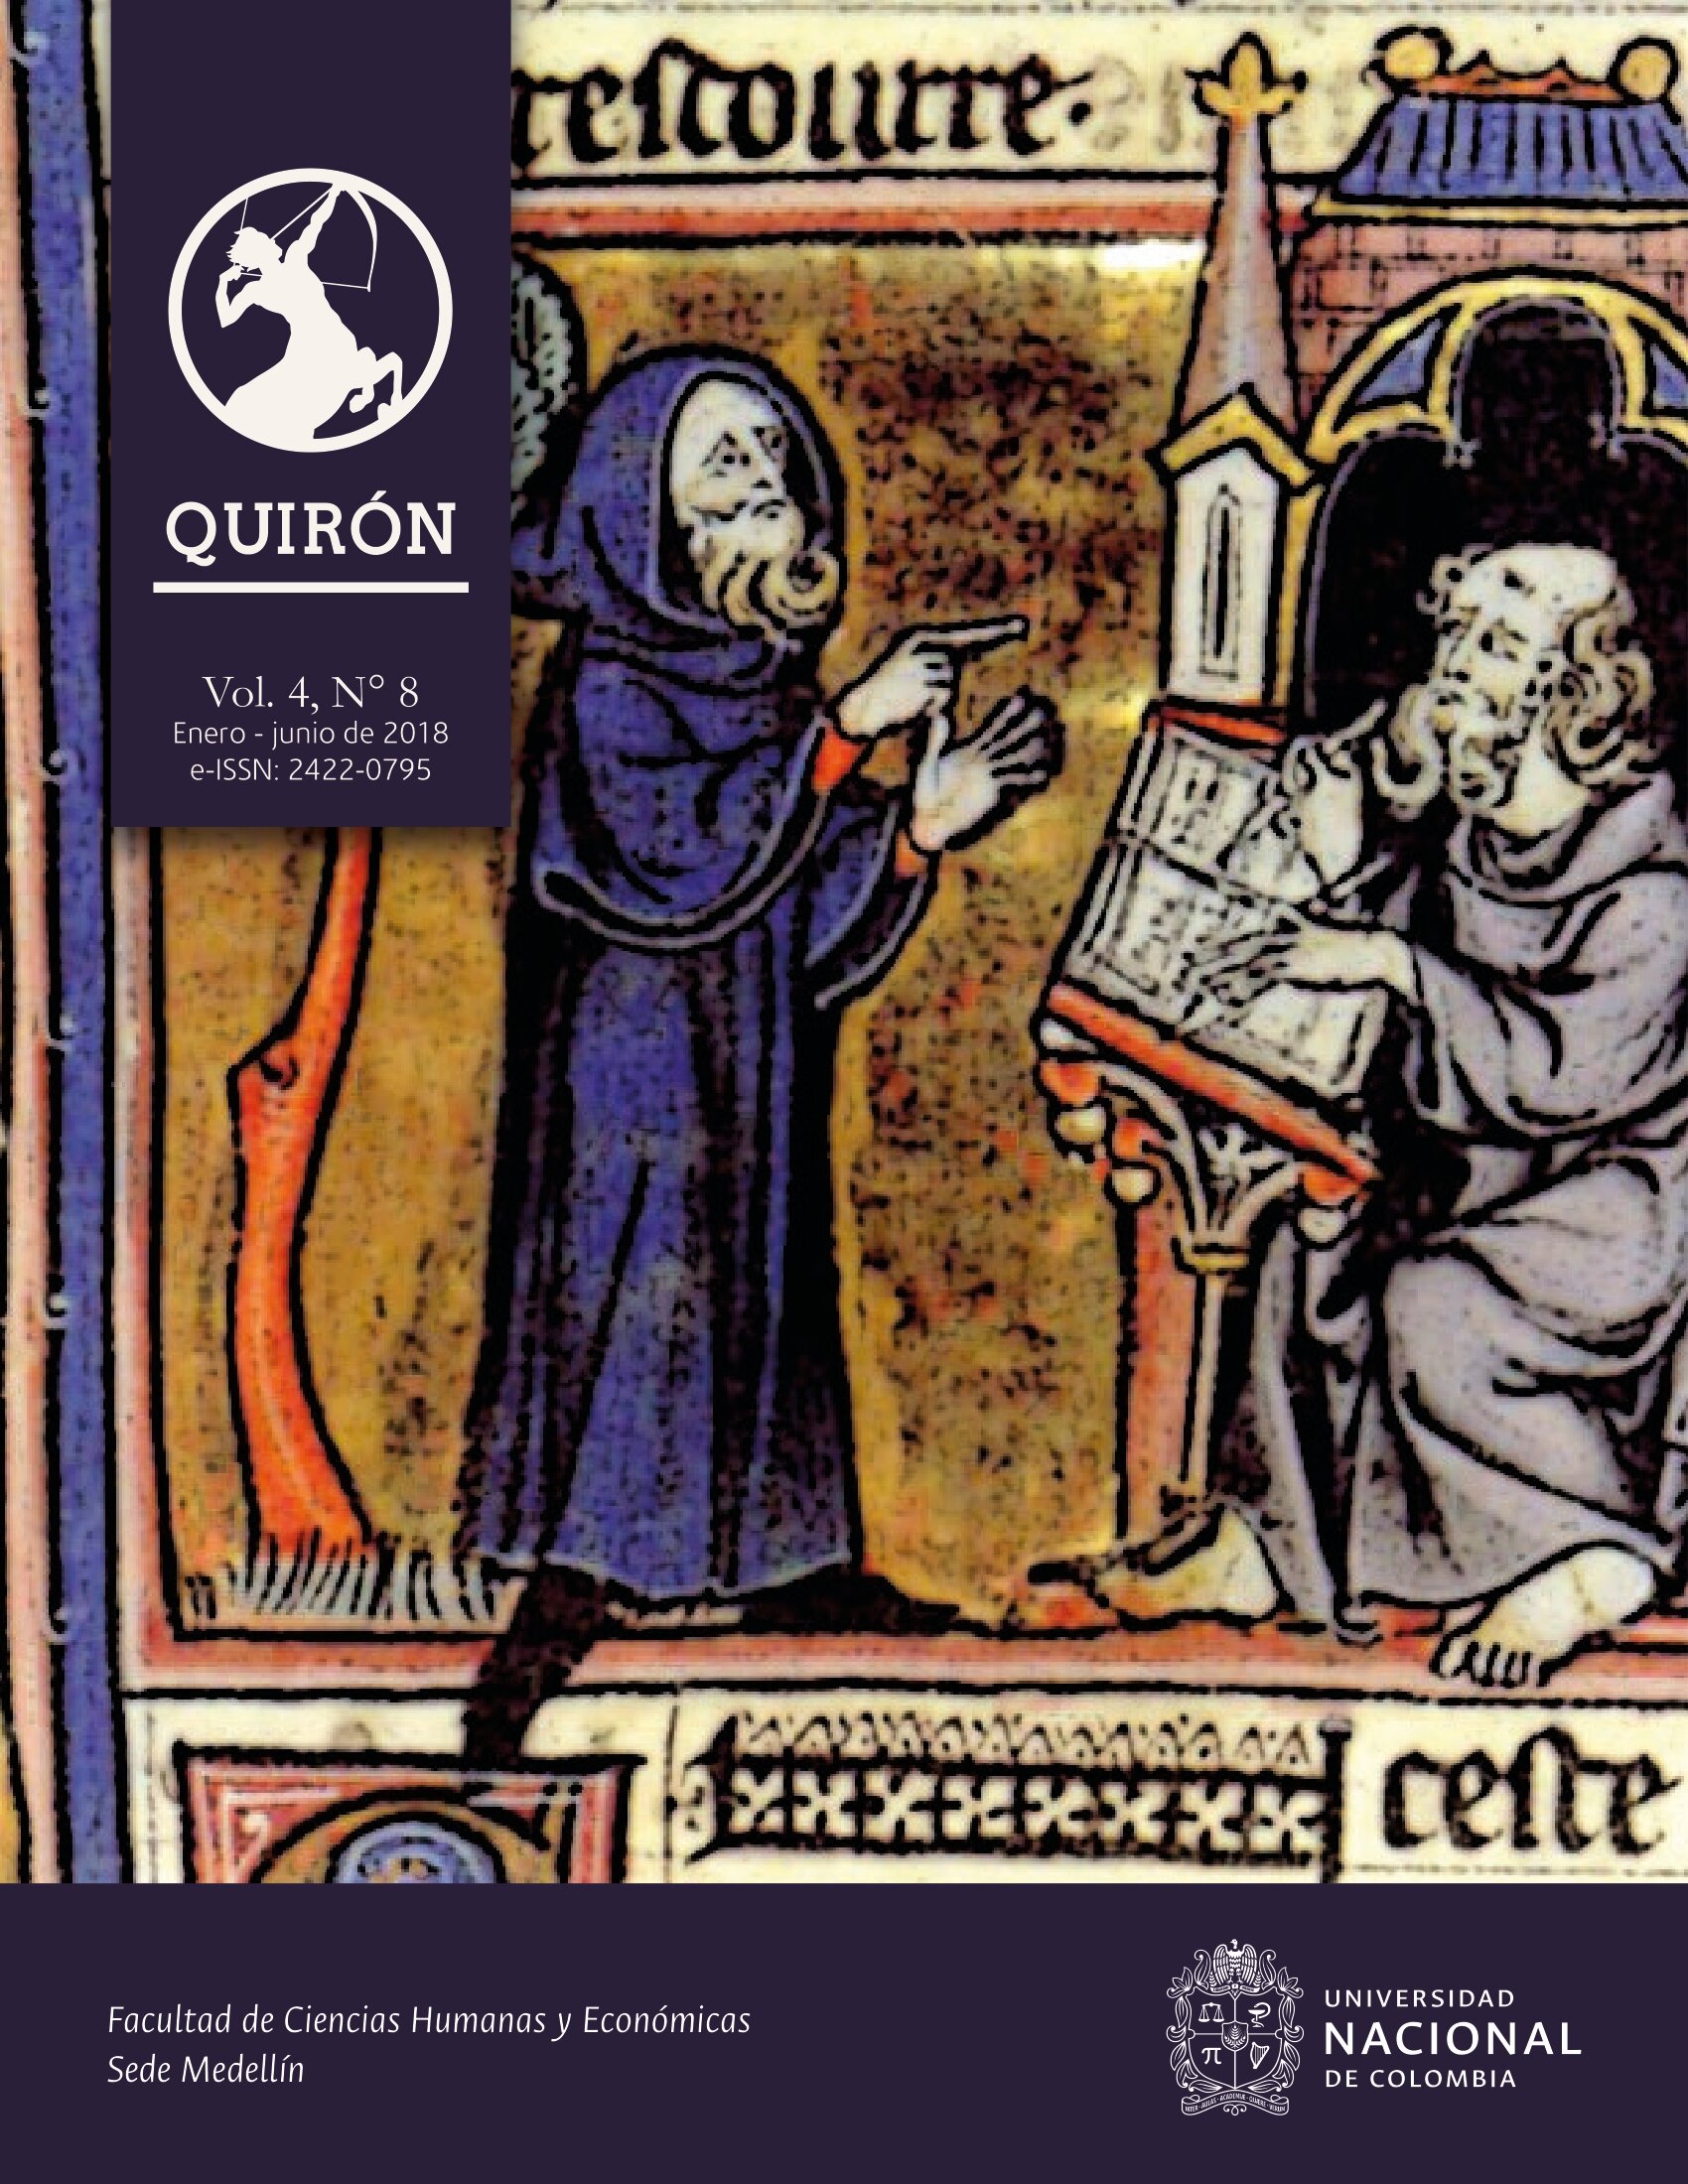 “Merlin dictating his prophecies to his scribe, Blaise; French 13th century miniature from Robert de Boron’s Merlin en prose (written ca. 1200).